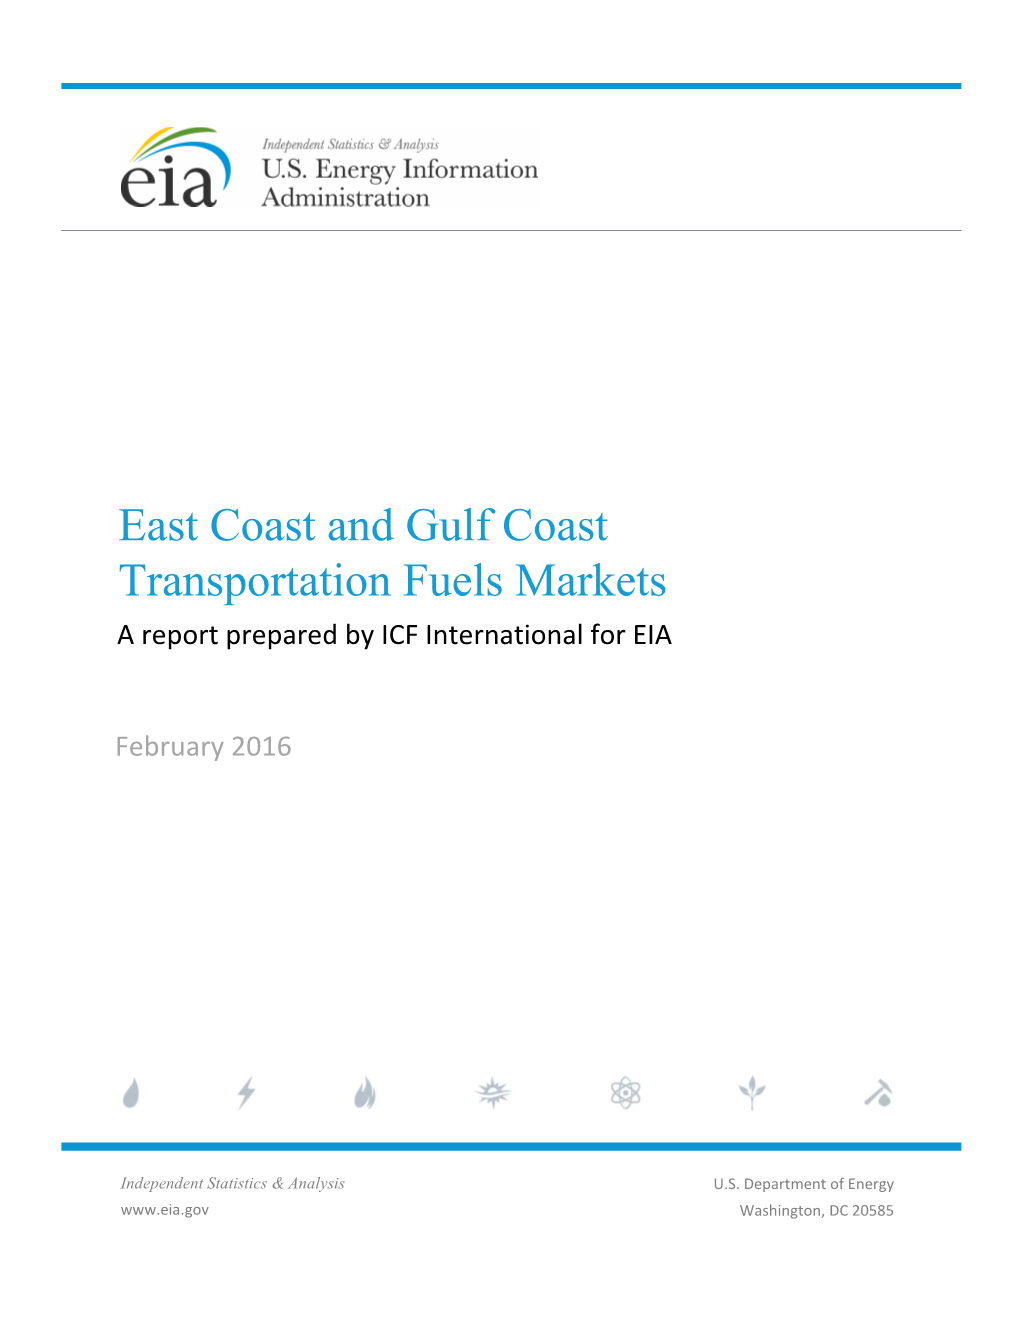 East Coast and Gulf Coast Transportation Fuels Markets a Report Prepared by ICF International for EIA